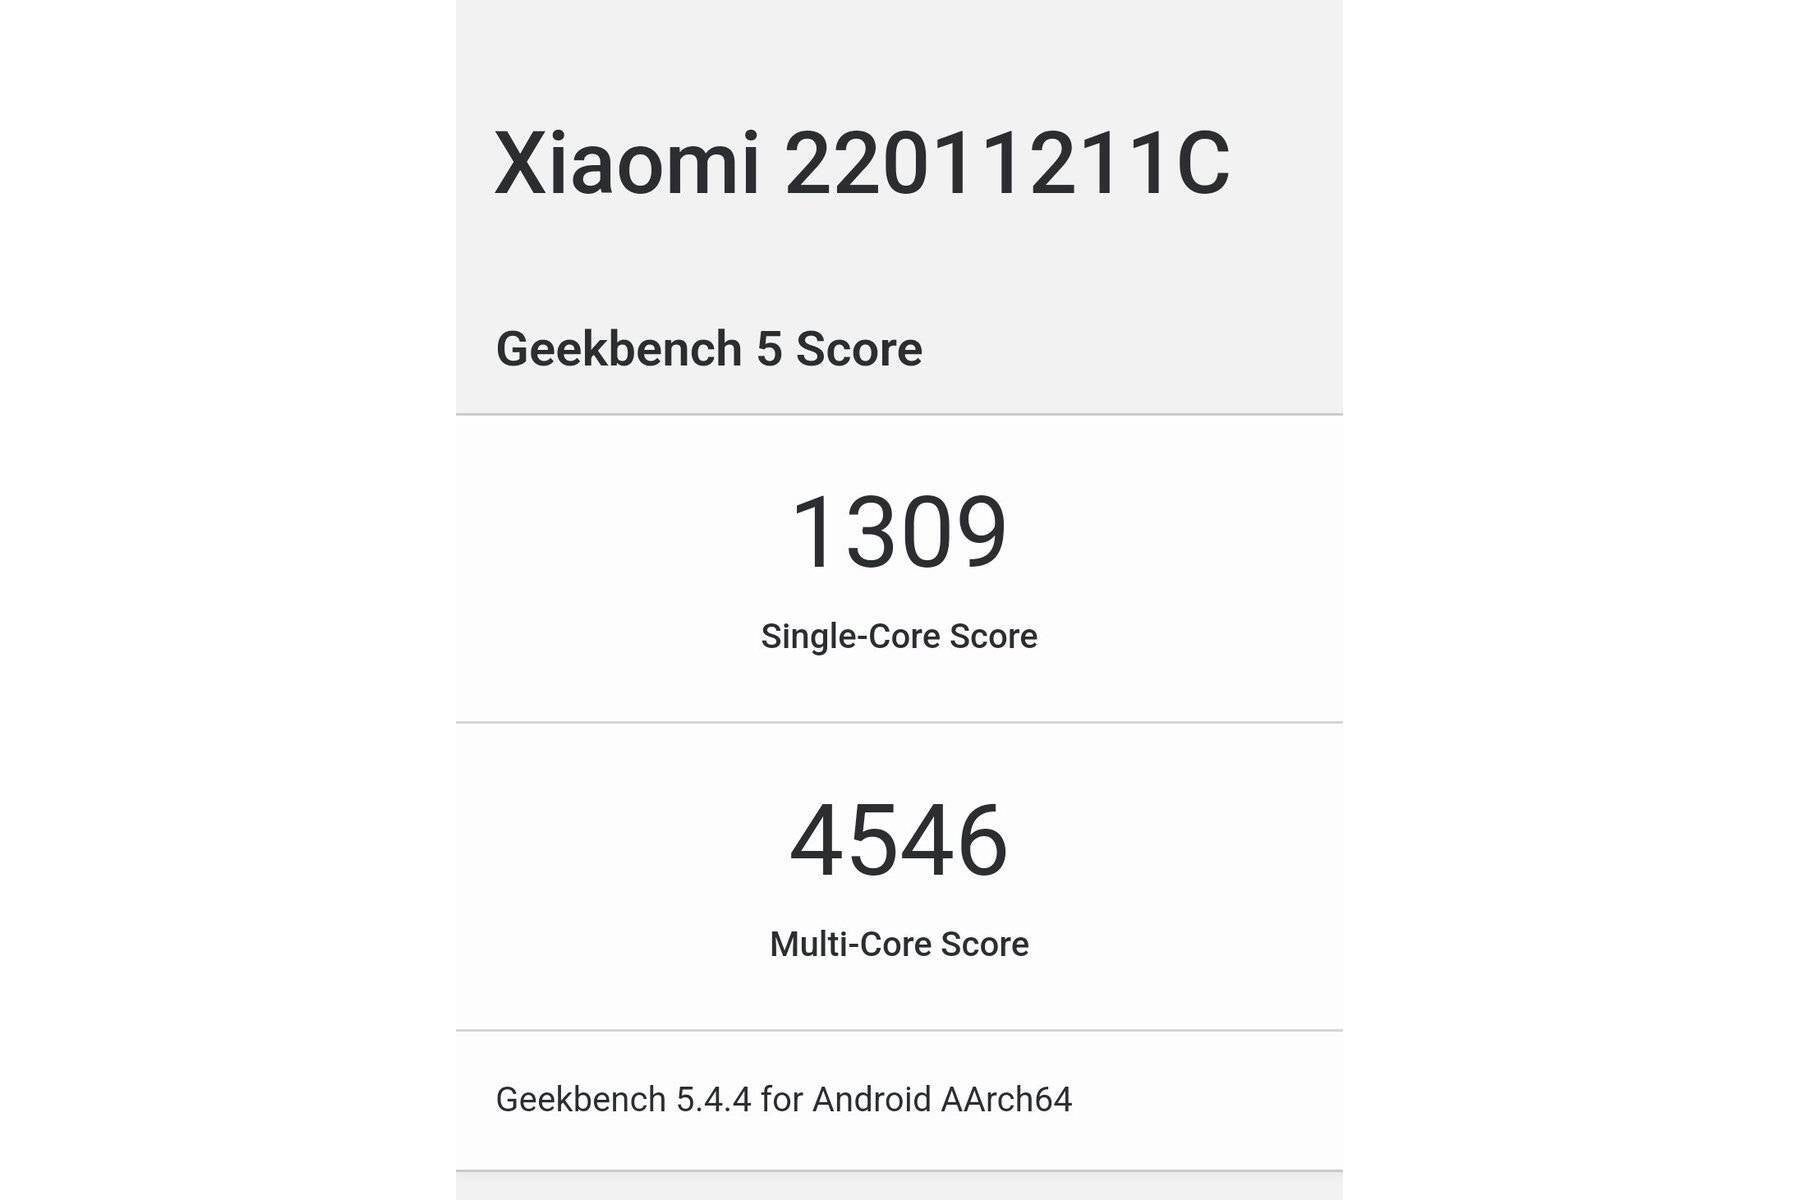 Alleged&amp;nbsp;Dimensity 9000 Geekbench 5 scores puts it ahead of most rivals - Forget Tensor, Exynos &amp; Snapdragon, Geekbench shows Dimensity 9000 is the true A15 rival